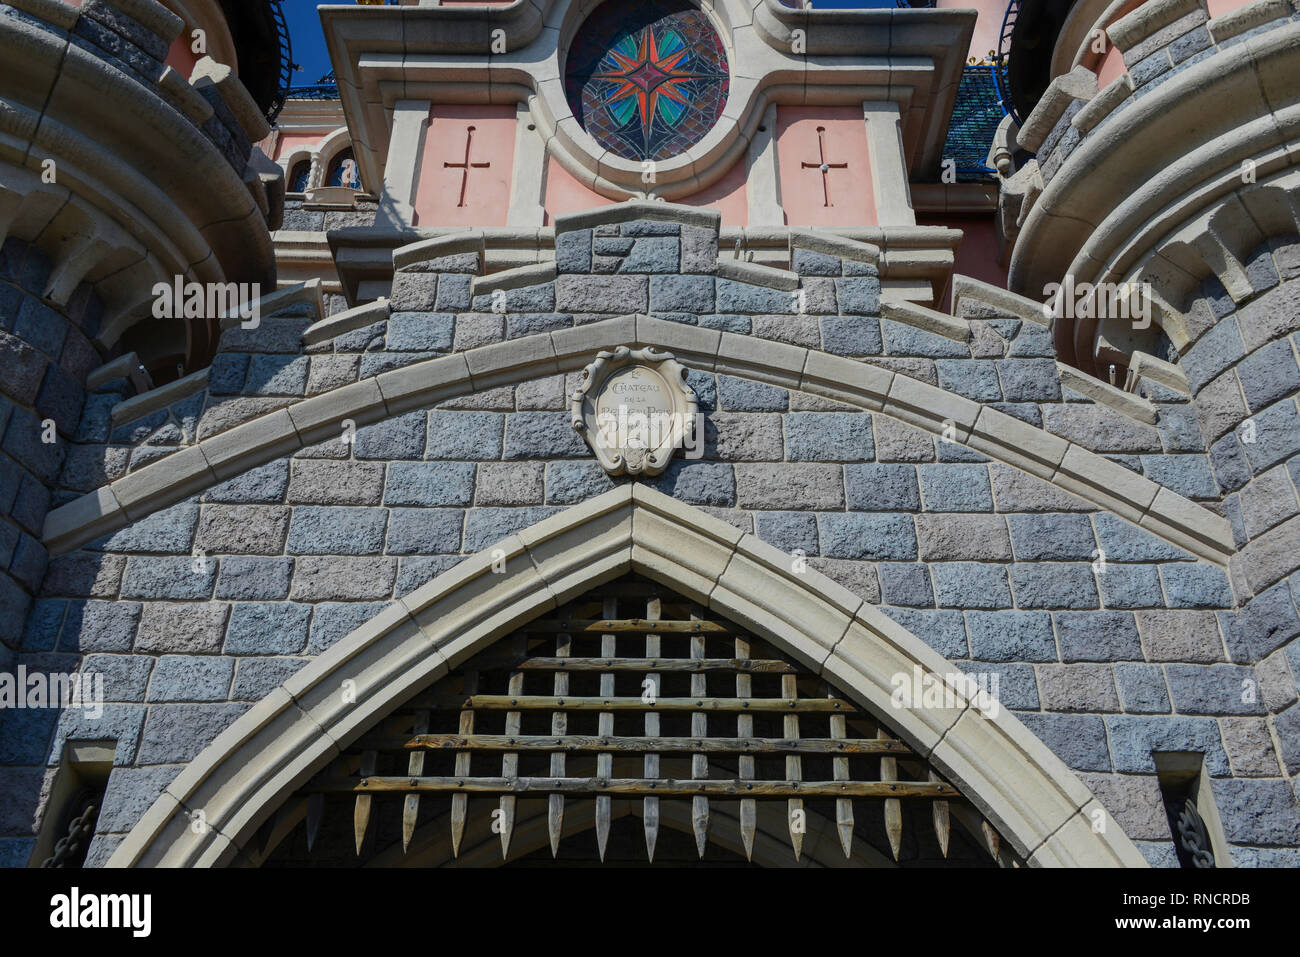 FRANCE, PARIS - February 29, 2016 - Detail view of the entrance to the Sleeping Beauty Castle, in Disneyland, Paris Stock Photo